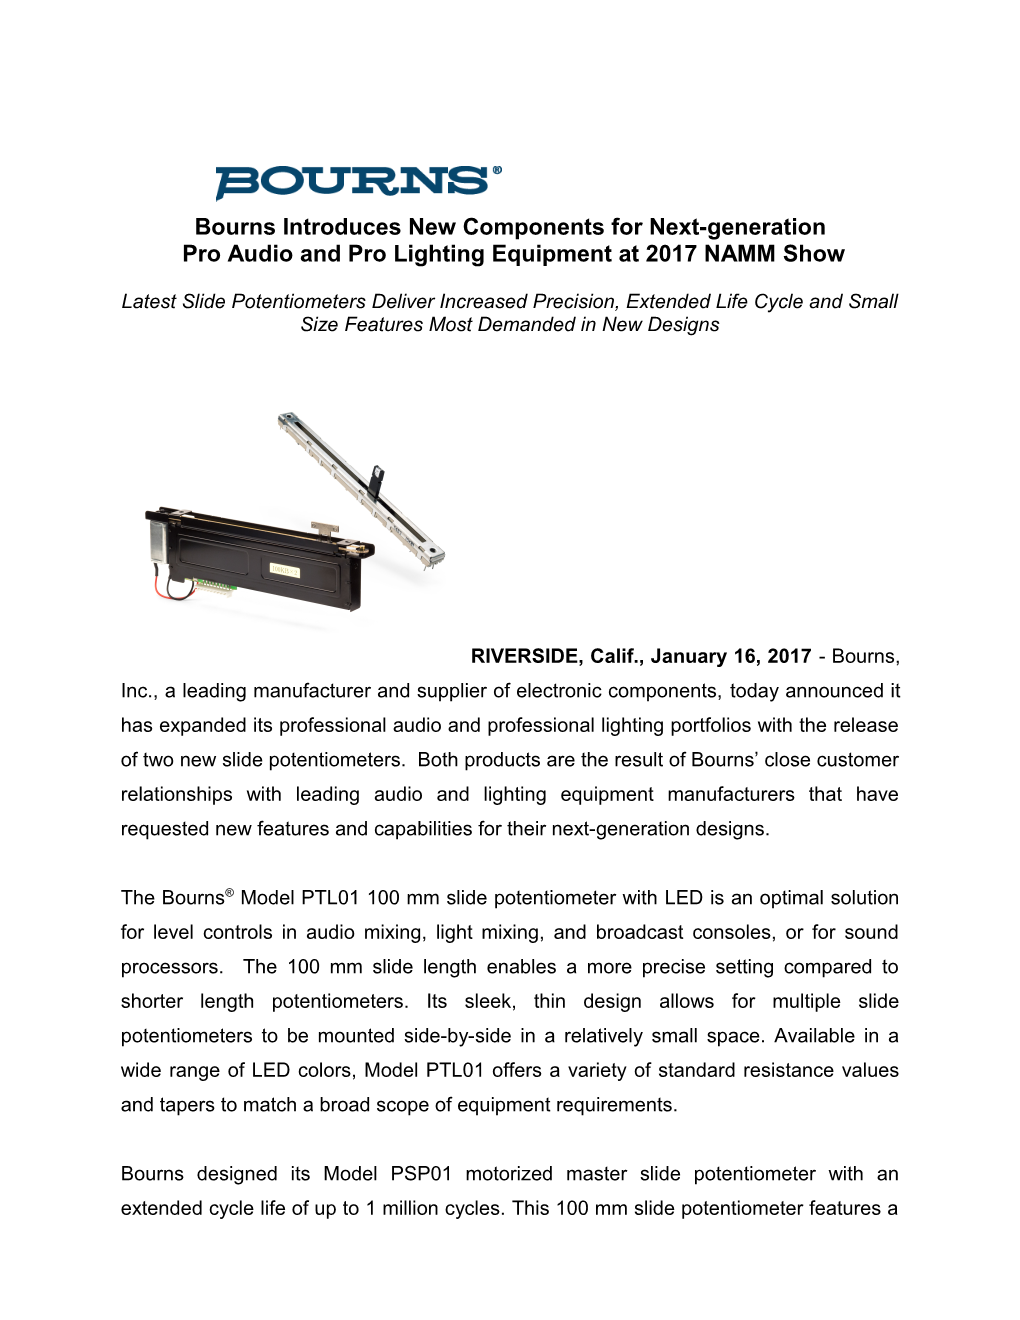 Bourns Introduces New Components for Next-Generation